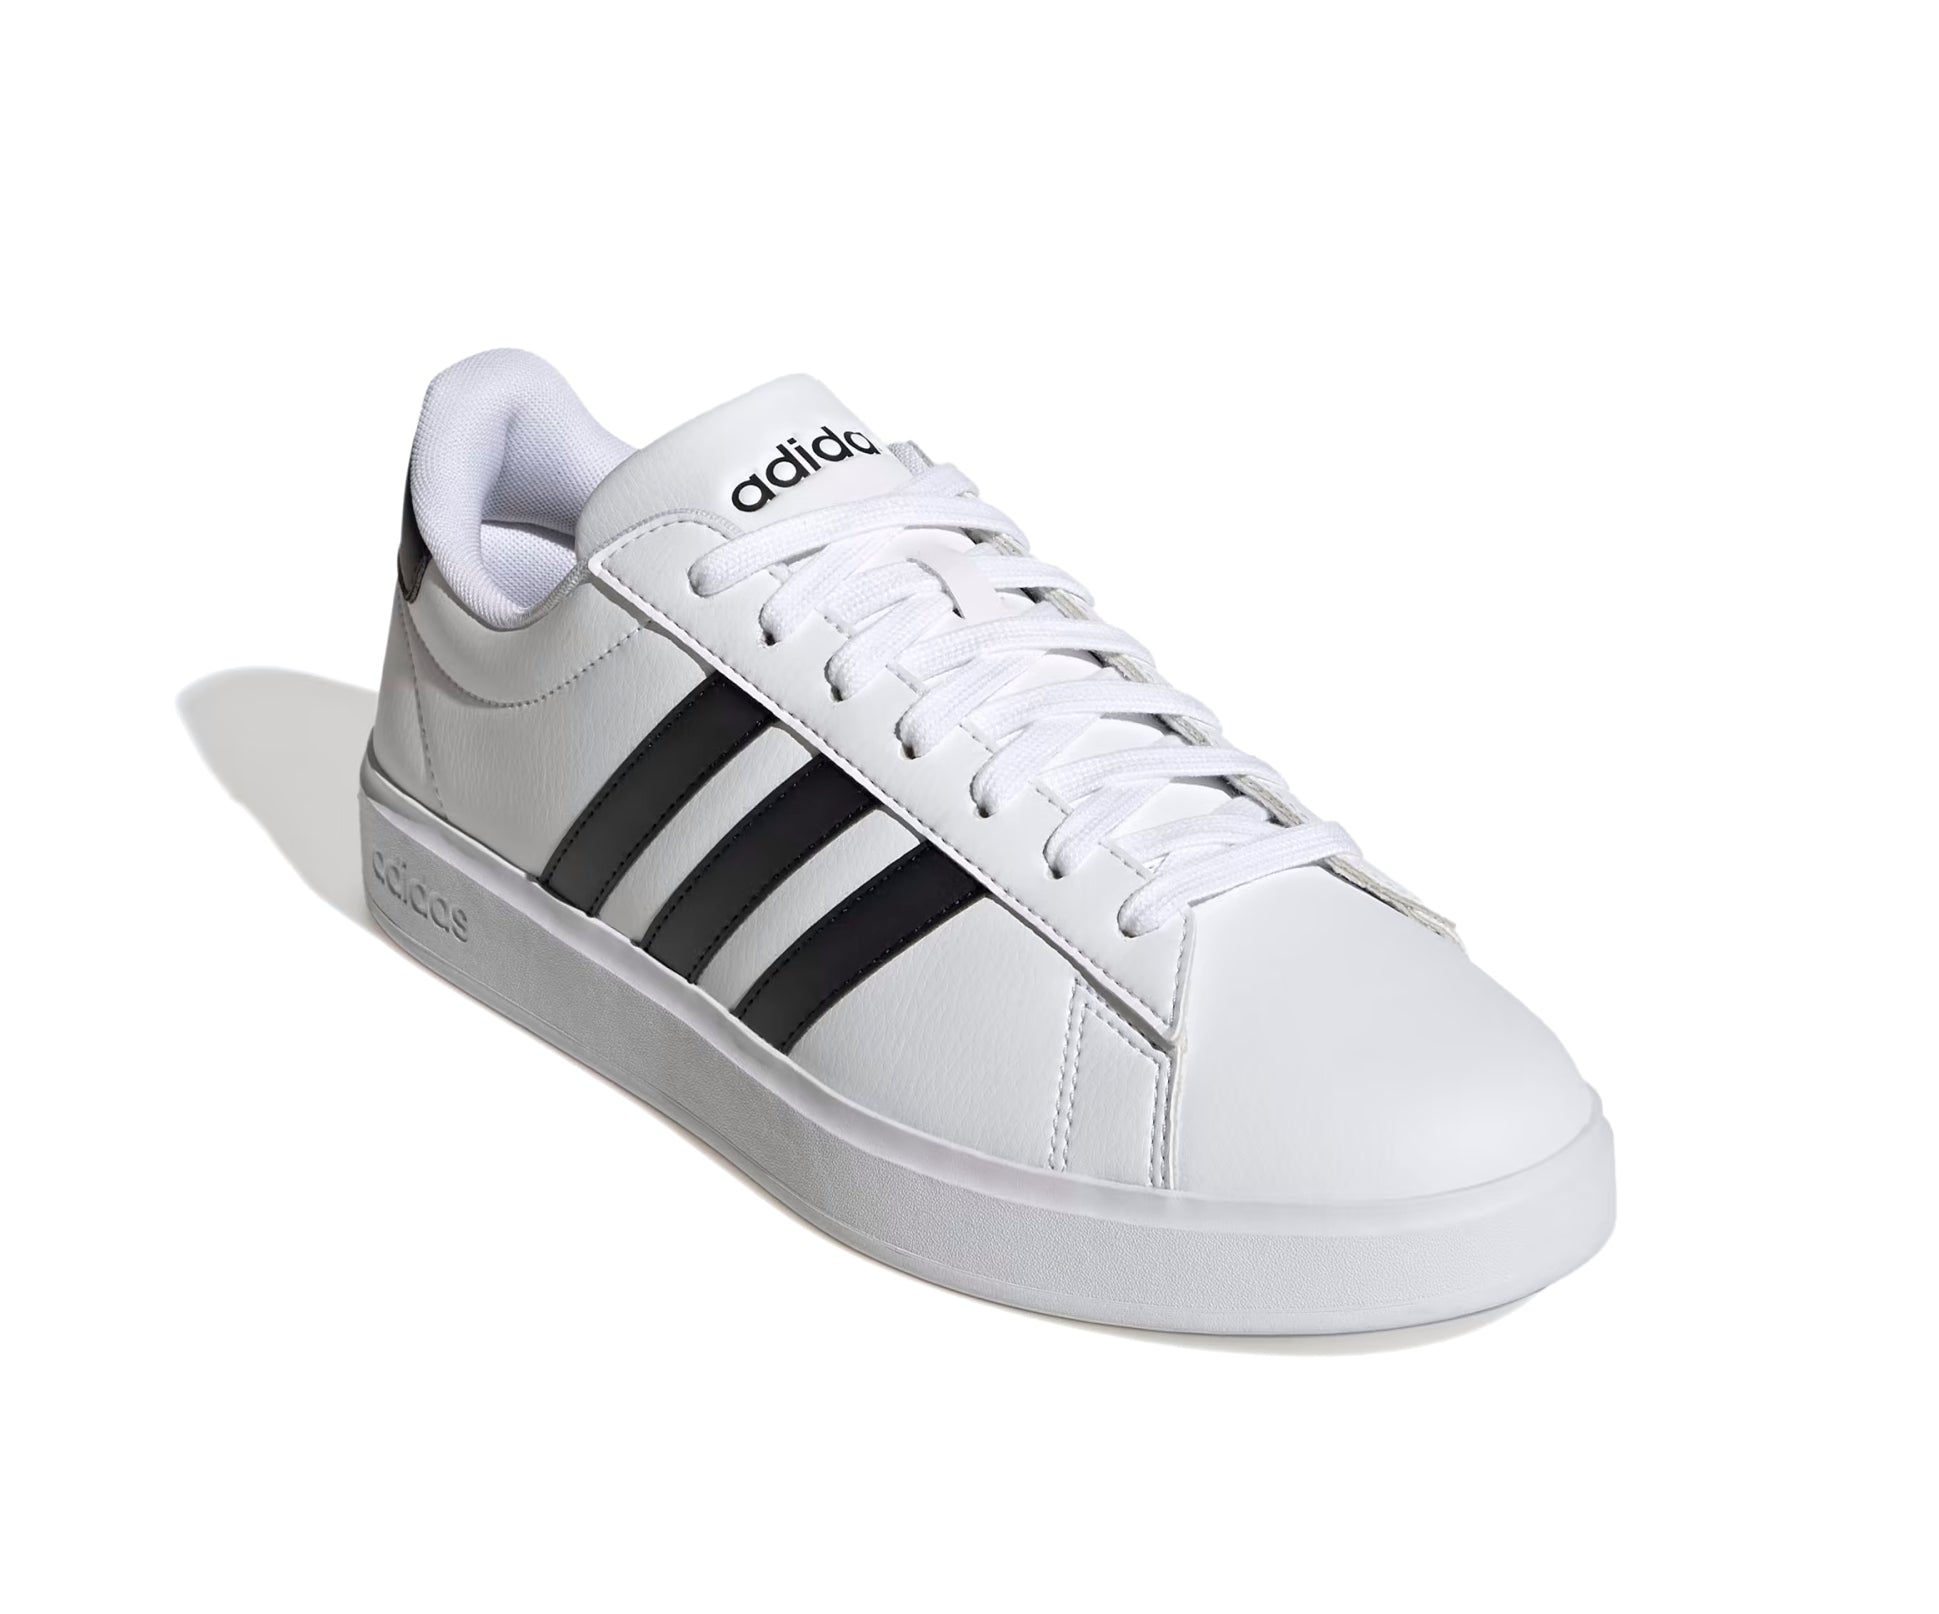 A white recycled faux-leather Adidas sneaker with black accents.